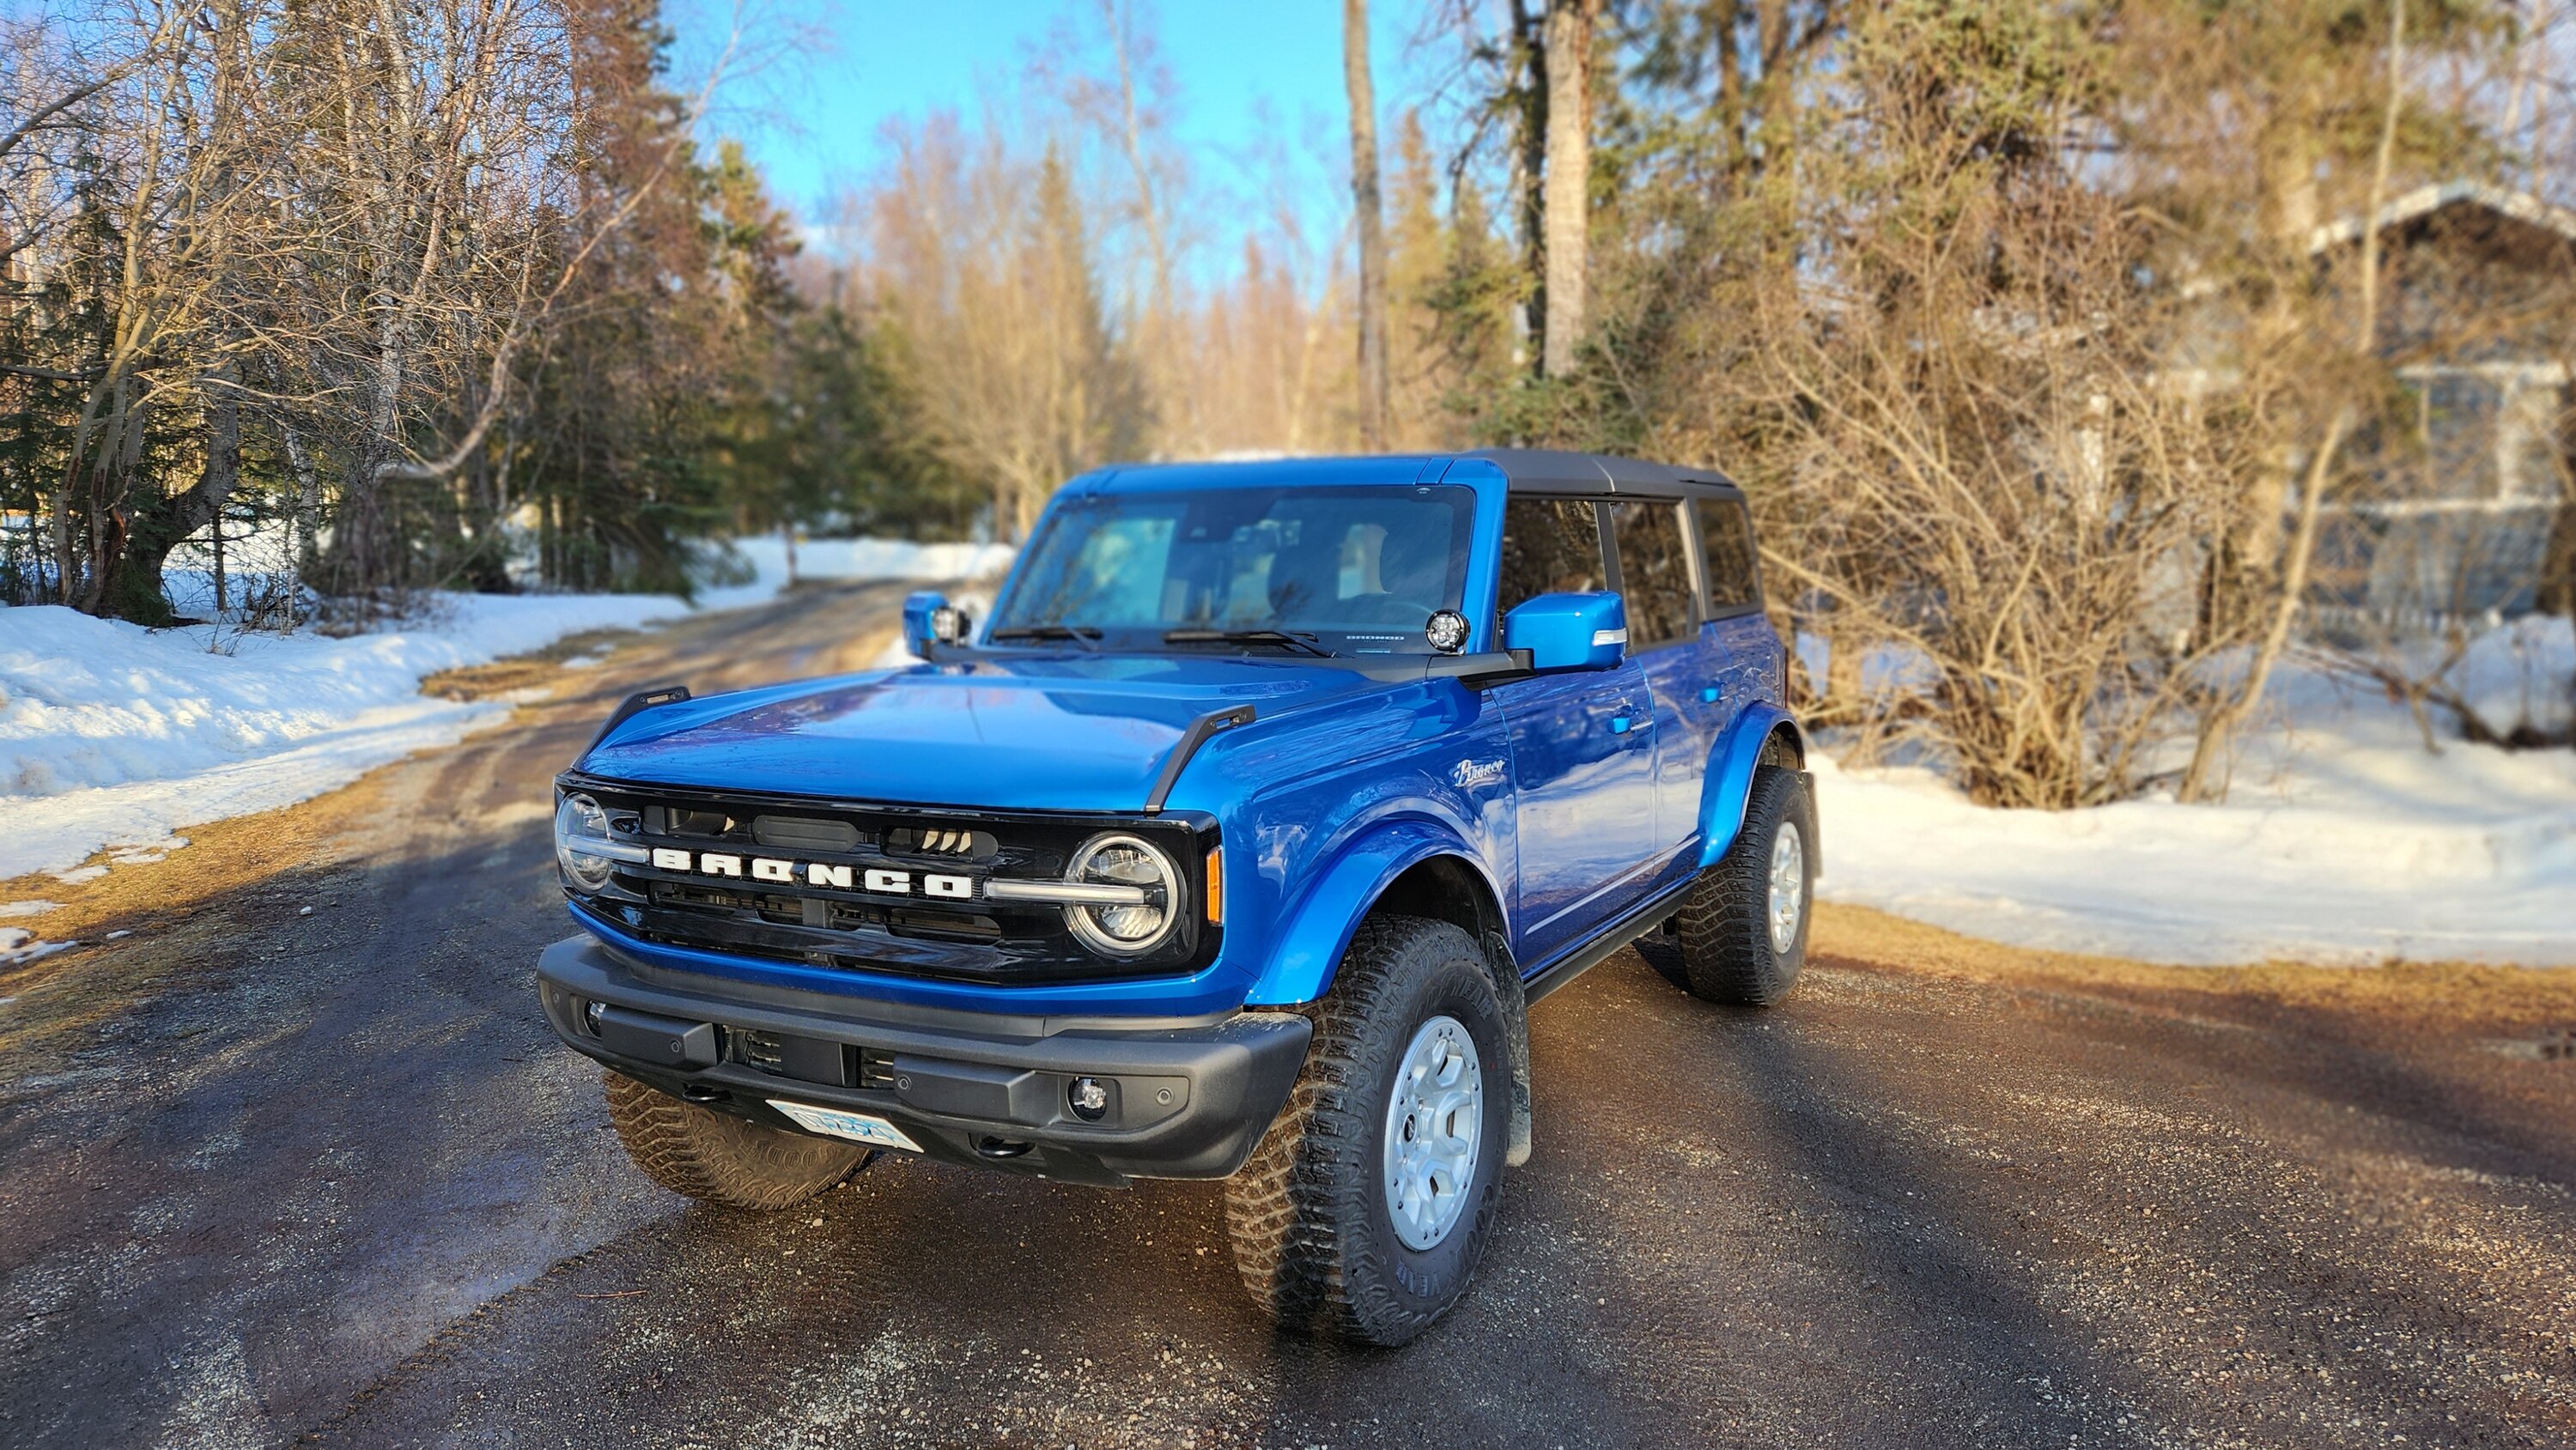 Ford Bronco Before & After Photos. Let's See Your Bronco! 20230418_194231